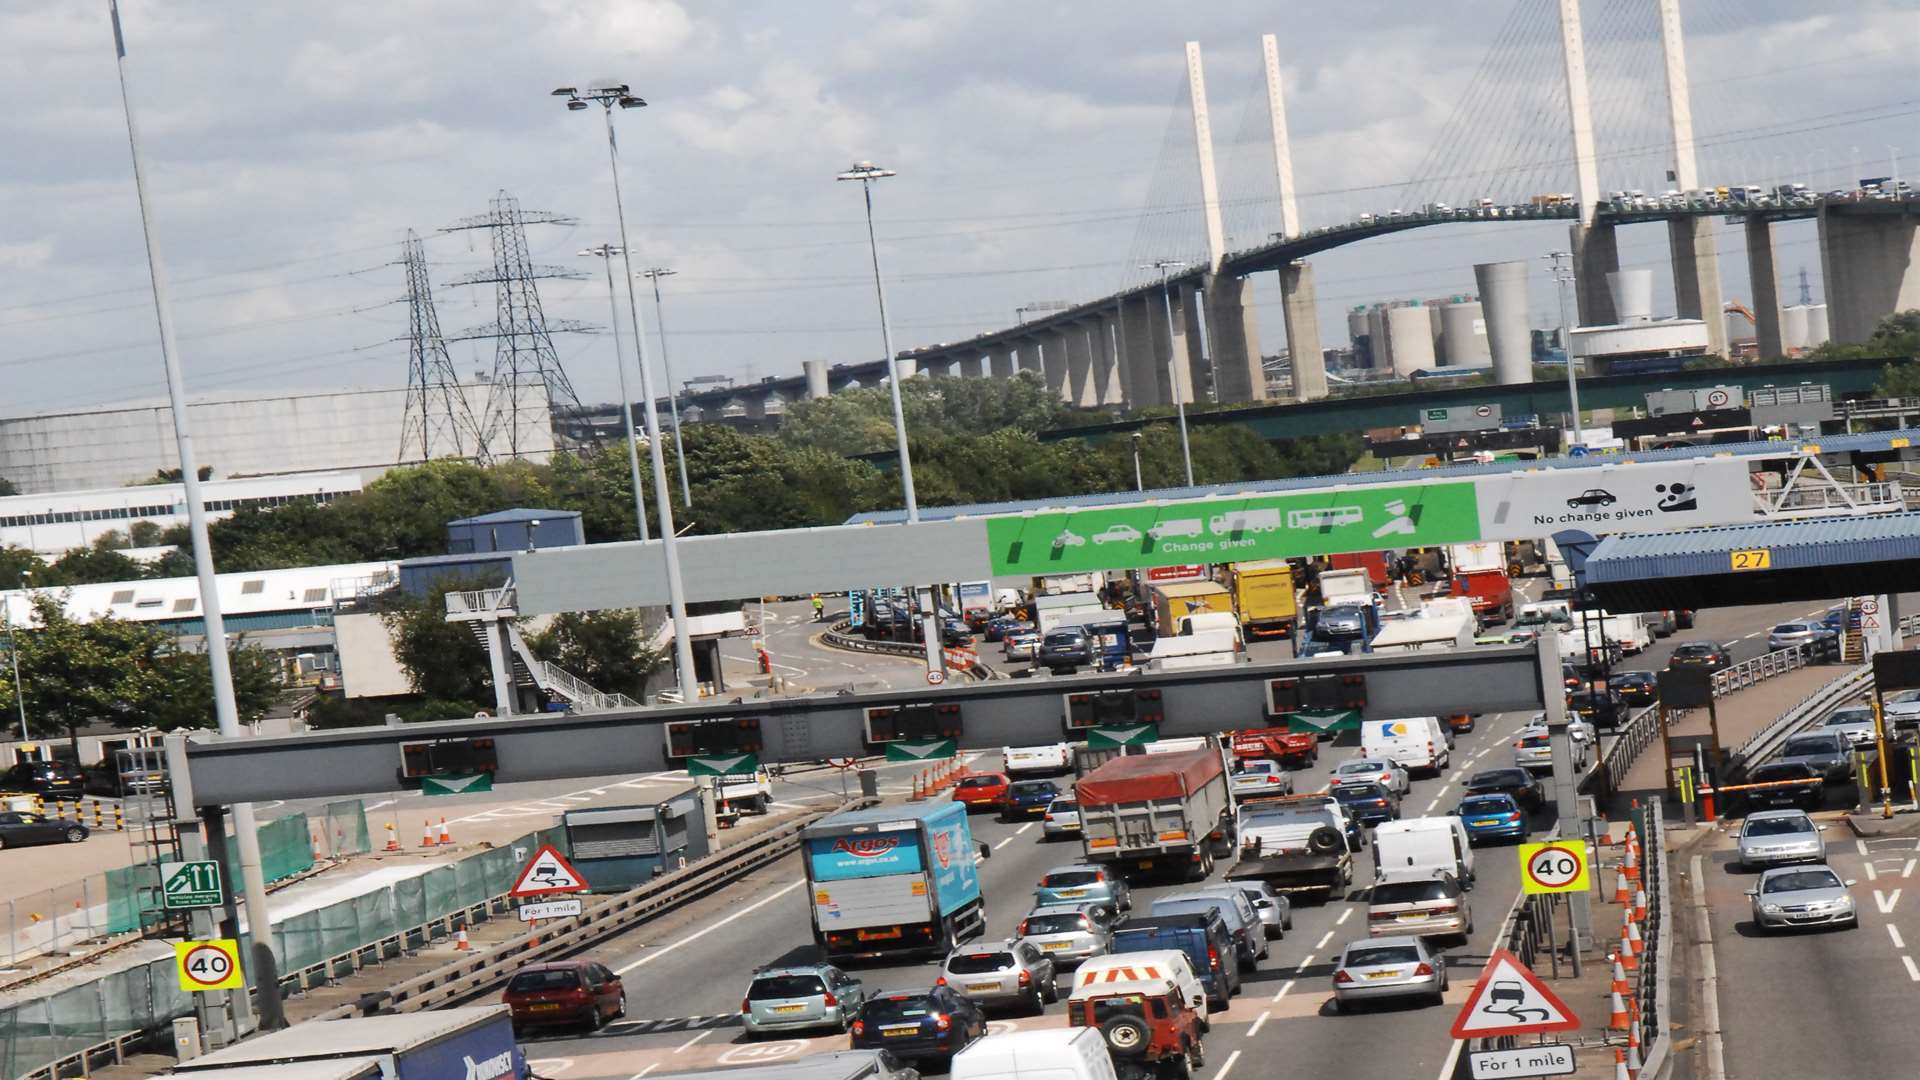 Long delays on approach to Dartford Crossing